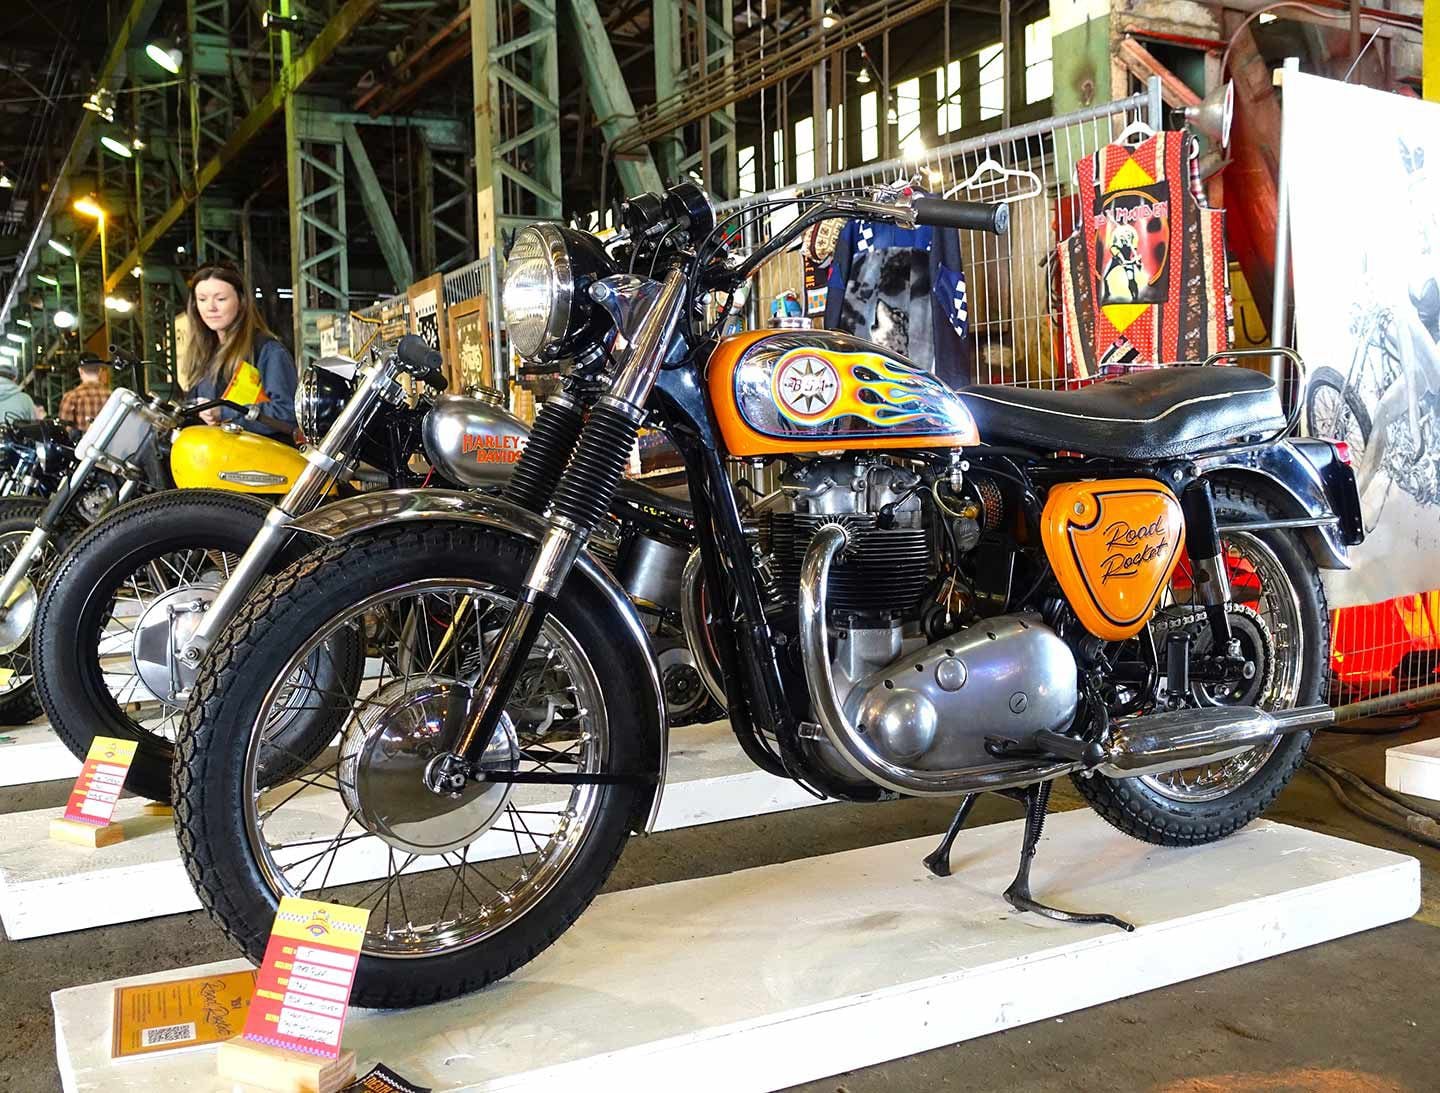 A very cool and clean 1962 BSA Rocket, in full color.